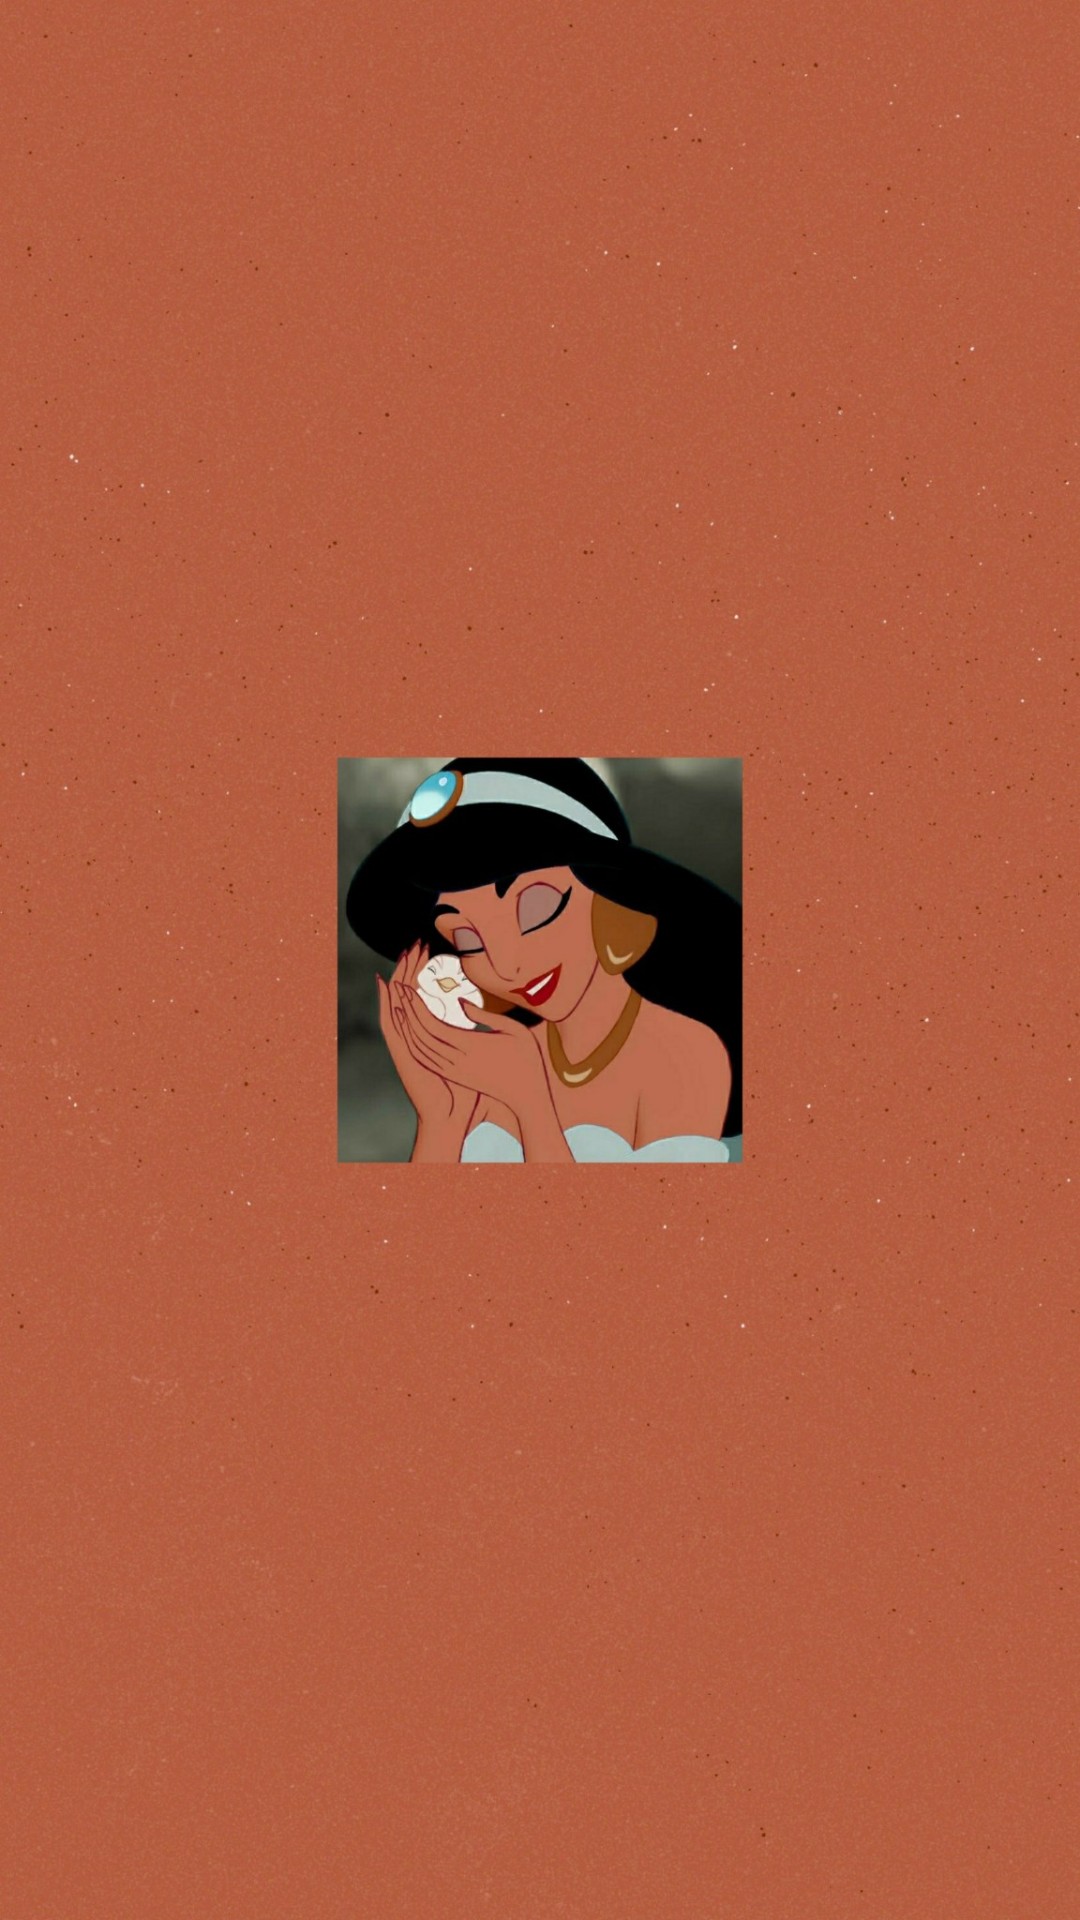 Aesthetic Disney wallpaper for phone with Jasmine from Aladdin. - Belle